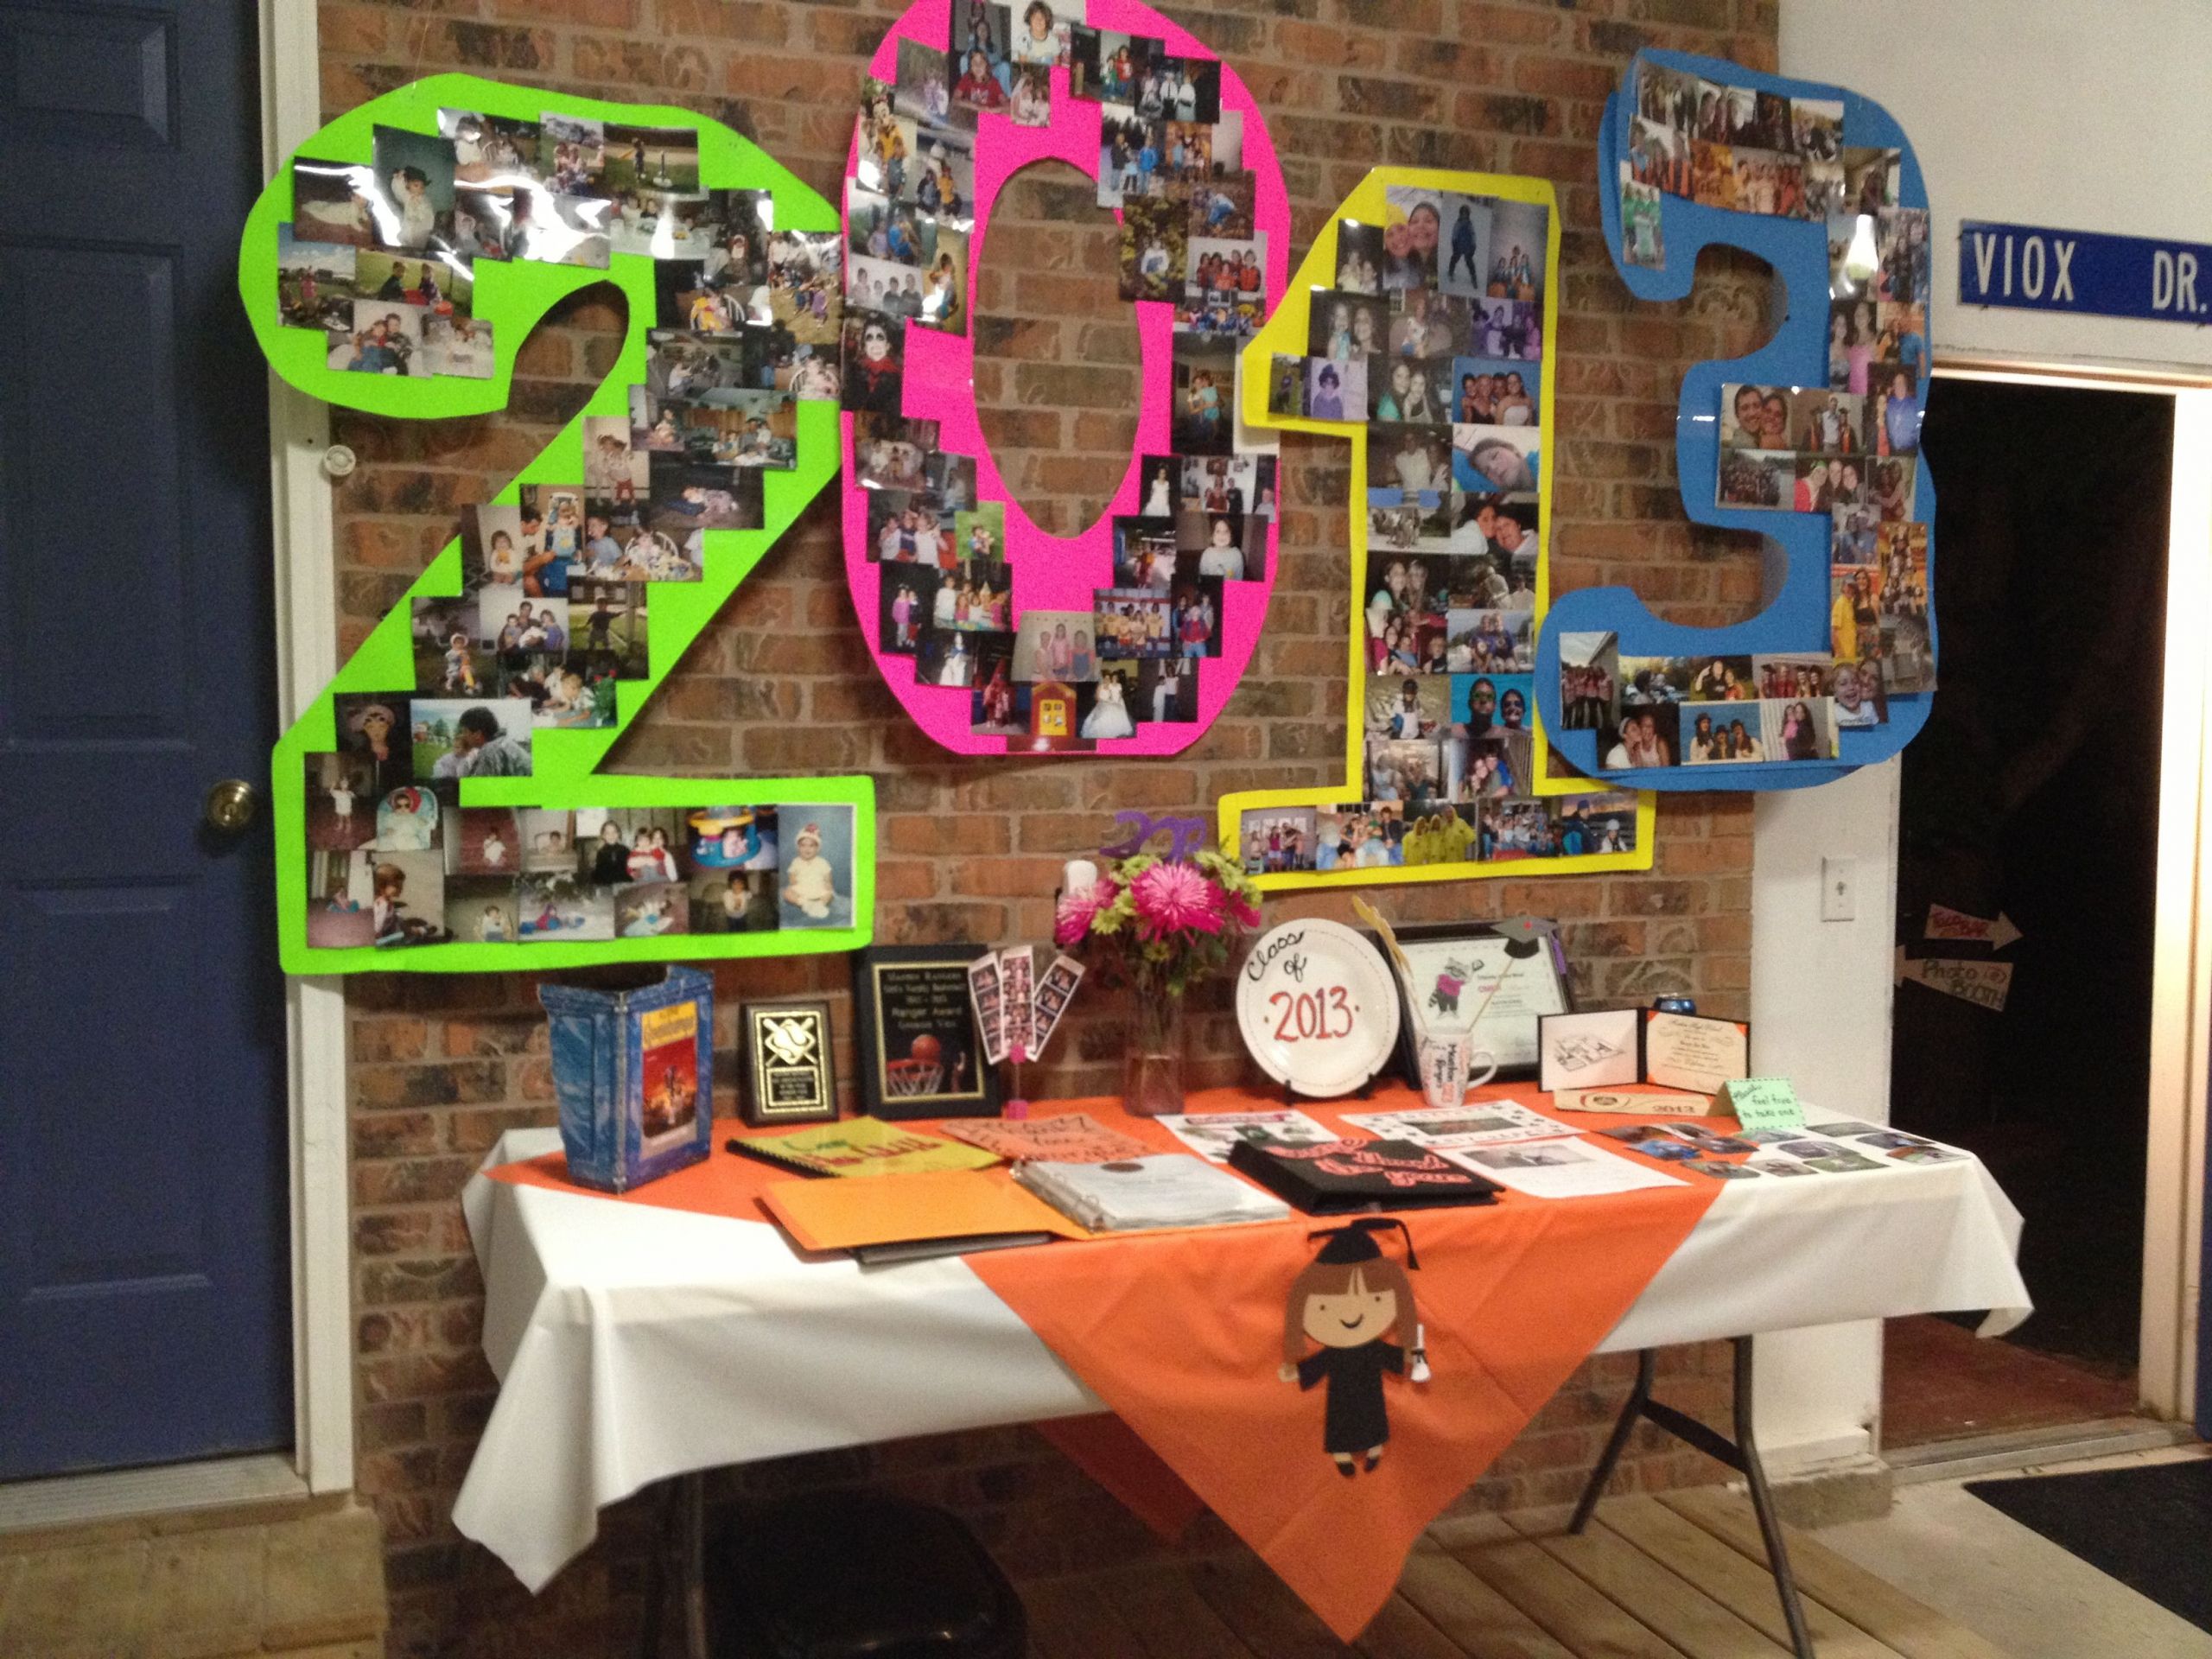 Jr High Graduation Party Ideas
 Graduation party decorations The numbers are created out